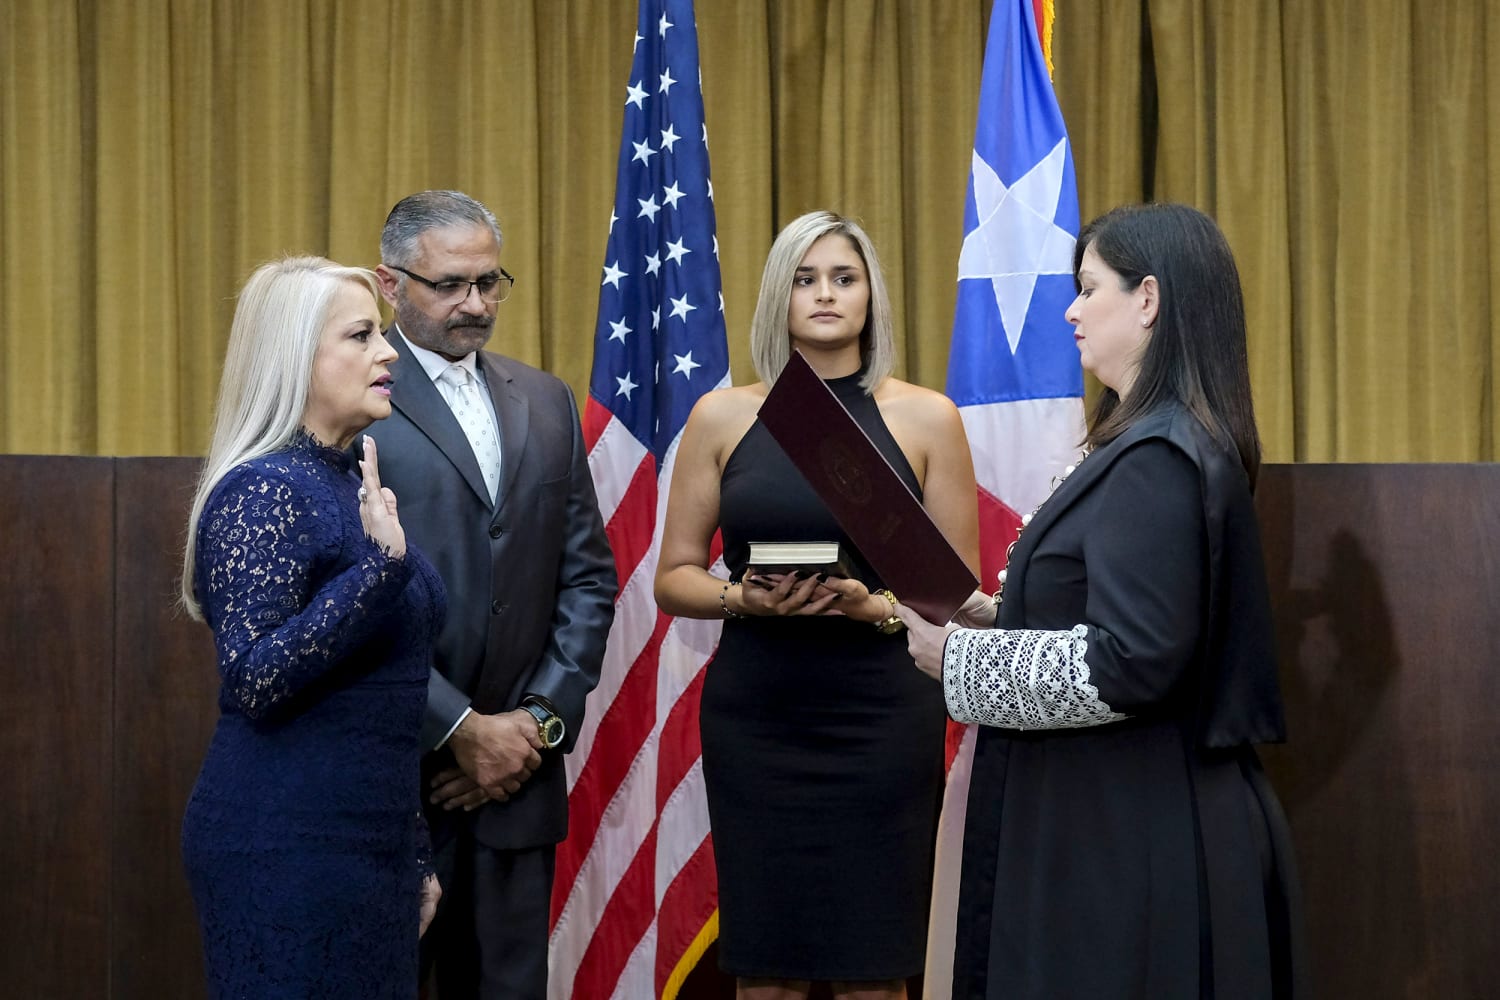 creencia camarera casamentero Wanda Vázquez becomes Puerto Rico's 3rd governor in a week after island's  highest court ruling